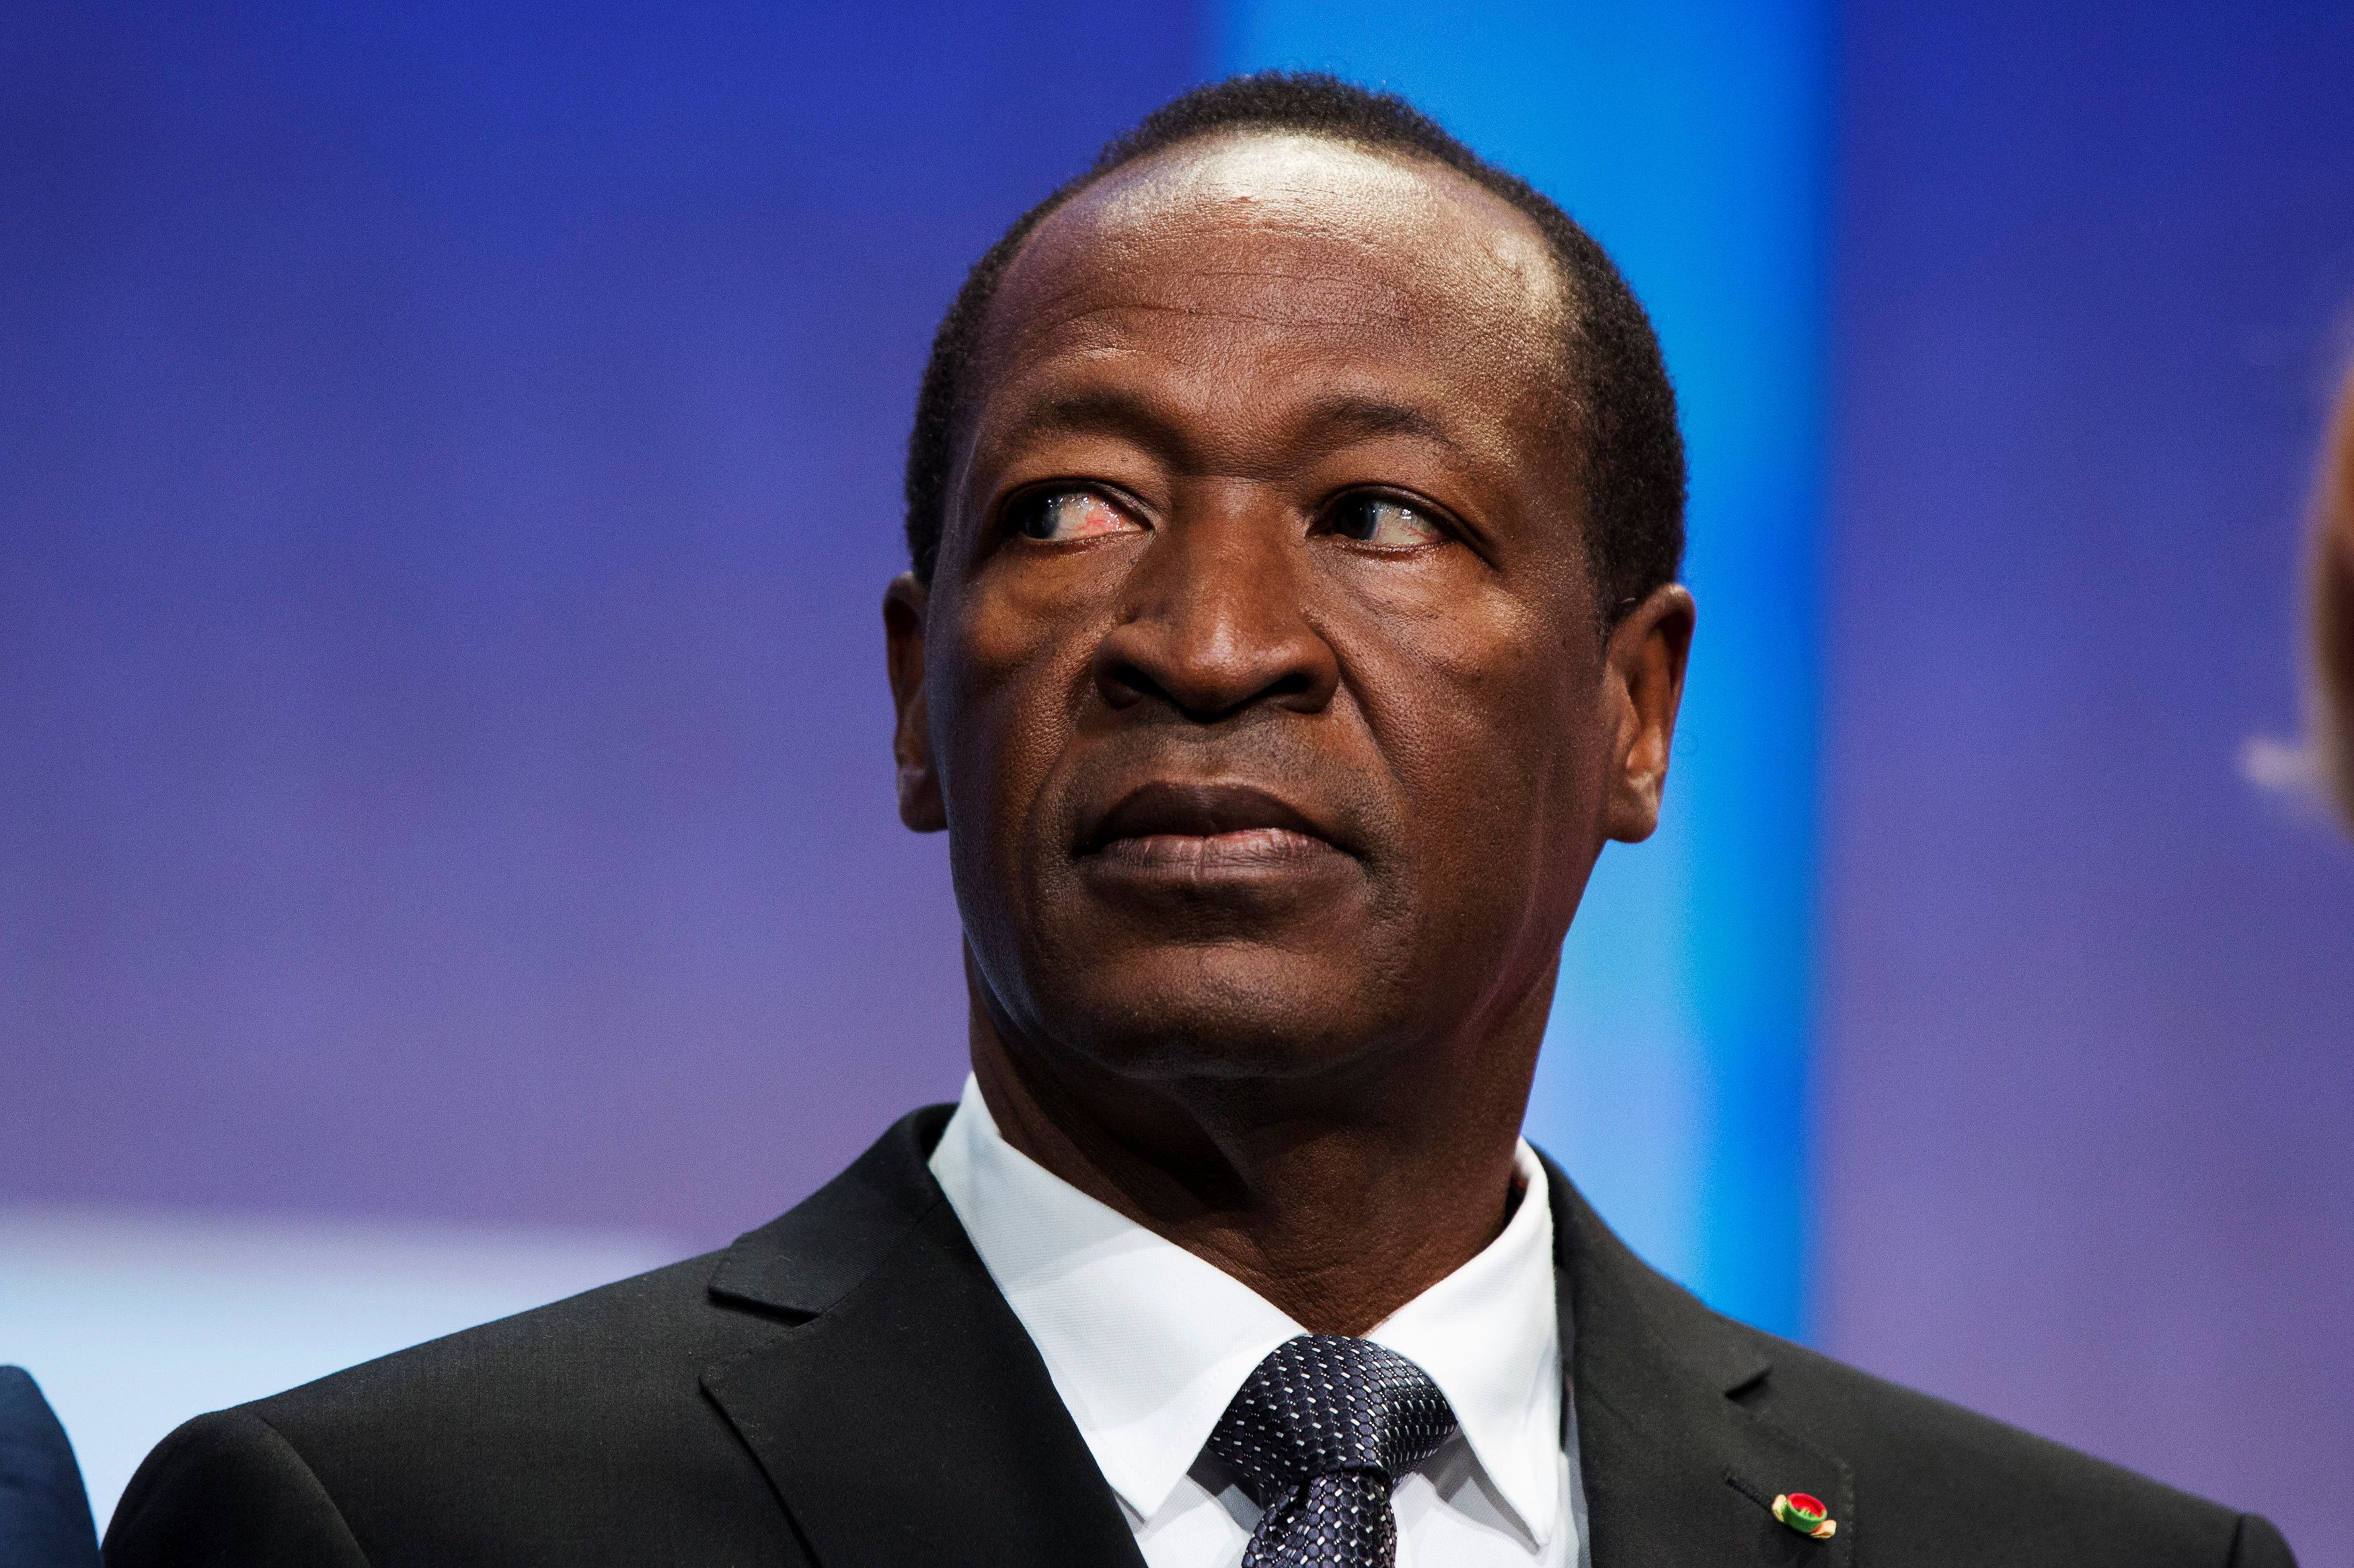 Then President of Burkina Faso, Blaise Compaore at the Clinton Global Initiative in New York